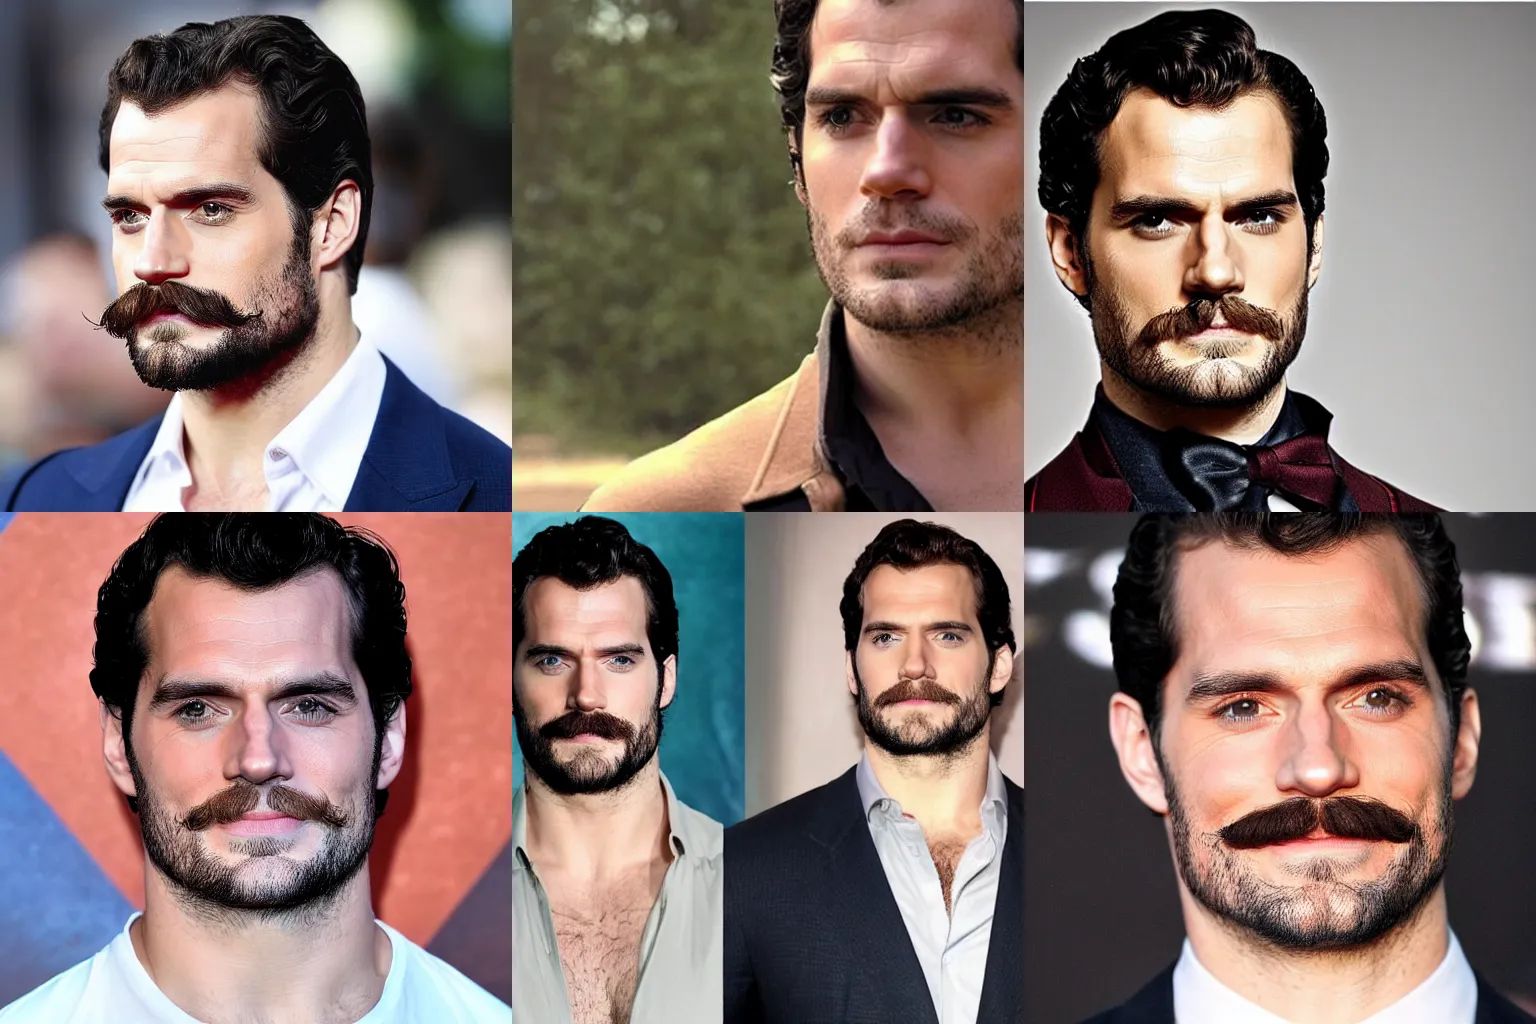 Prompt: Henry Cavill with a prominent mustache but no beard